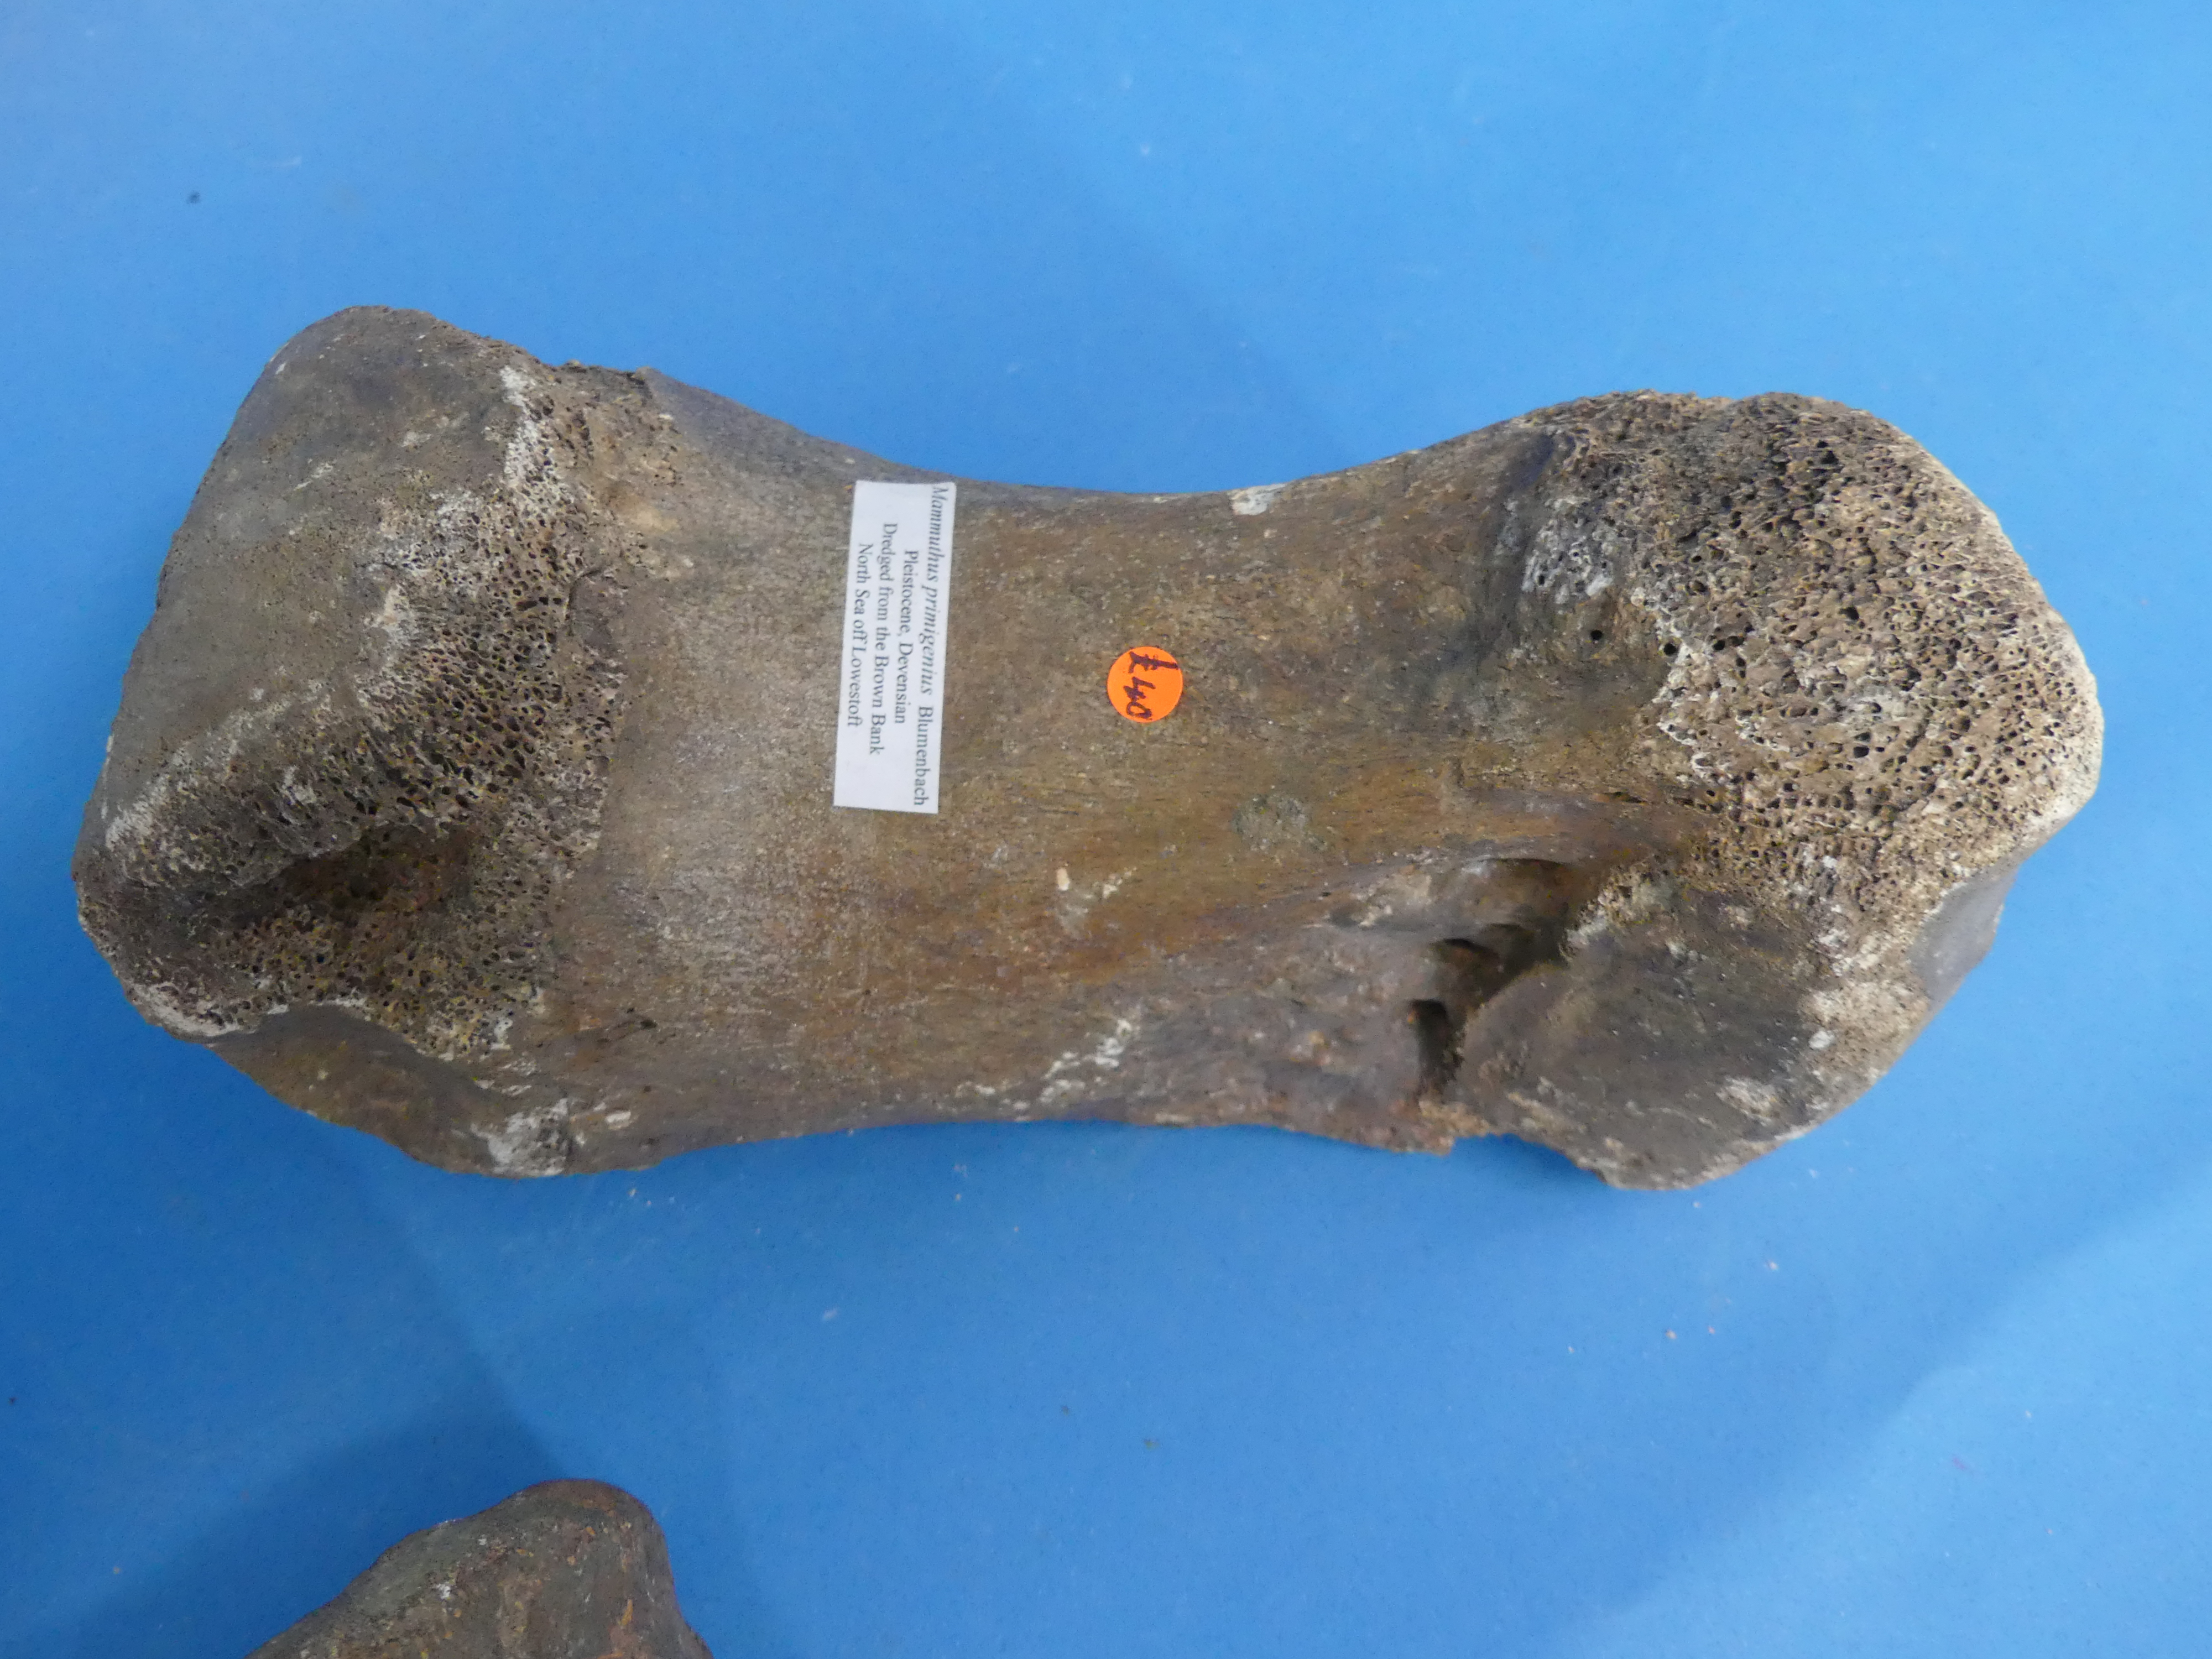 Natural History, Paleontology and Minerals; Two Iguanodon Bone Fossil Specimens, Cretaceous - Image 7 of 8